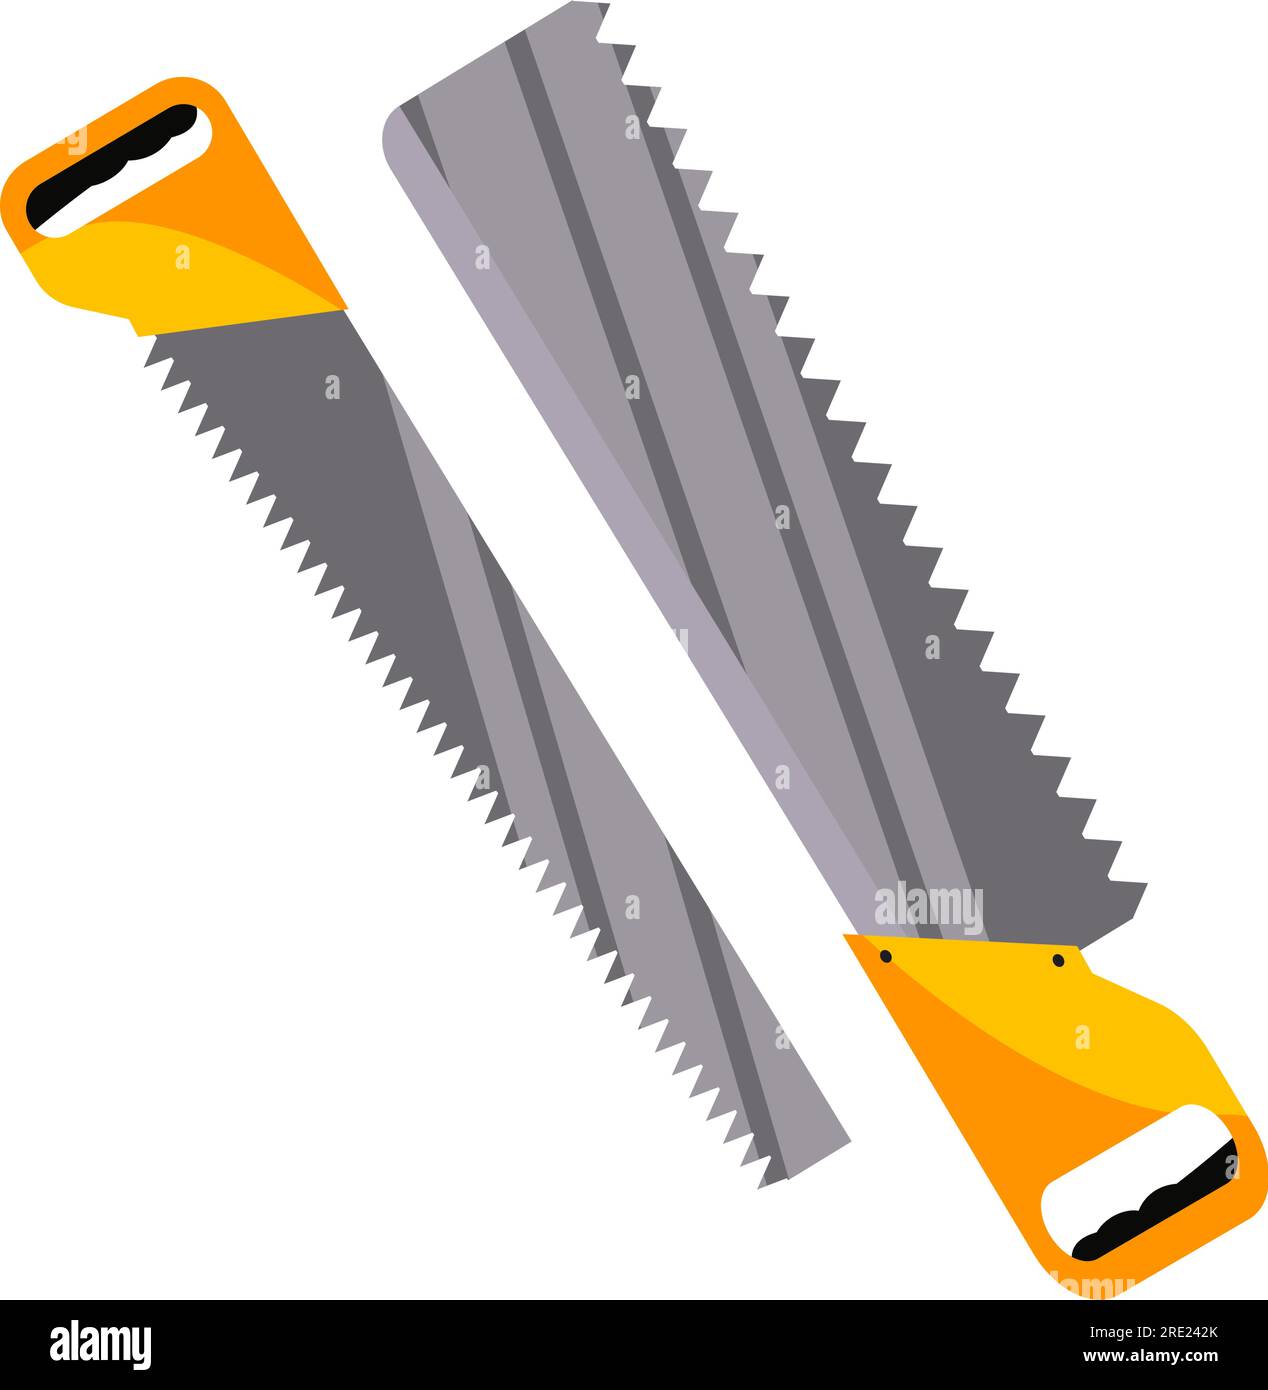 Two manual chainsaws illustration Stock Vector